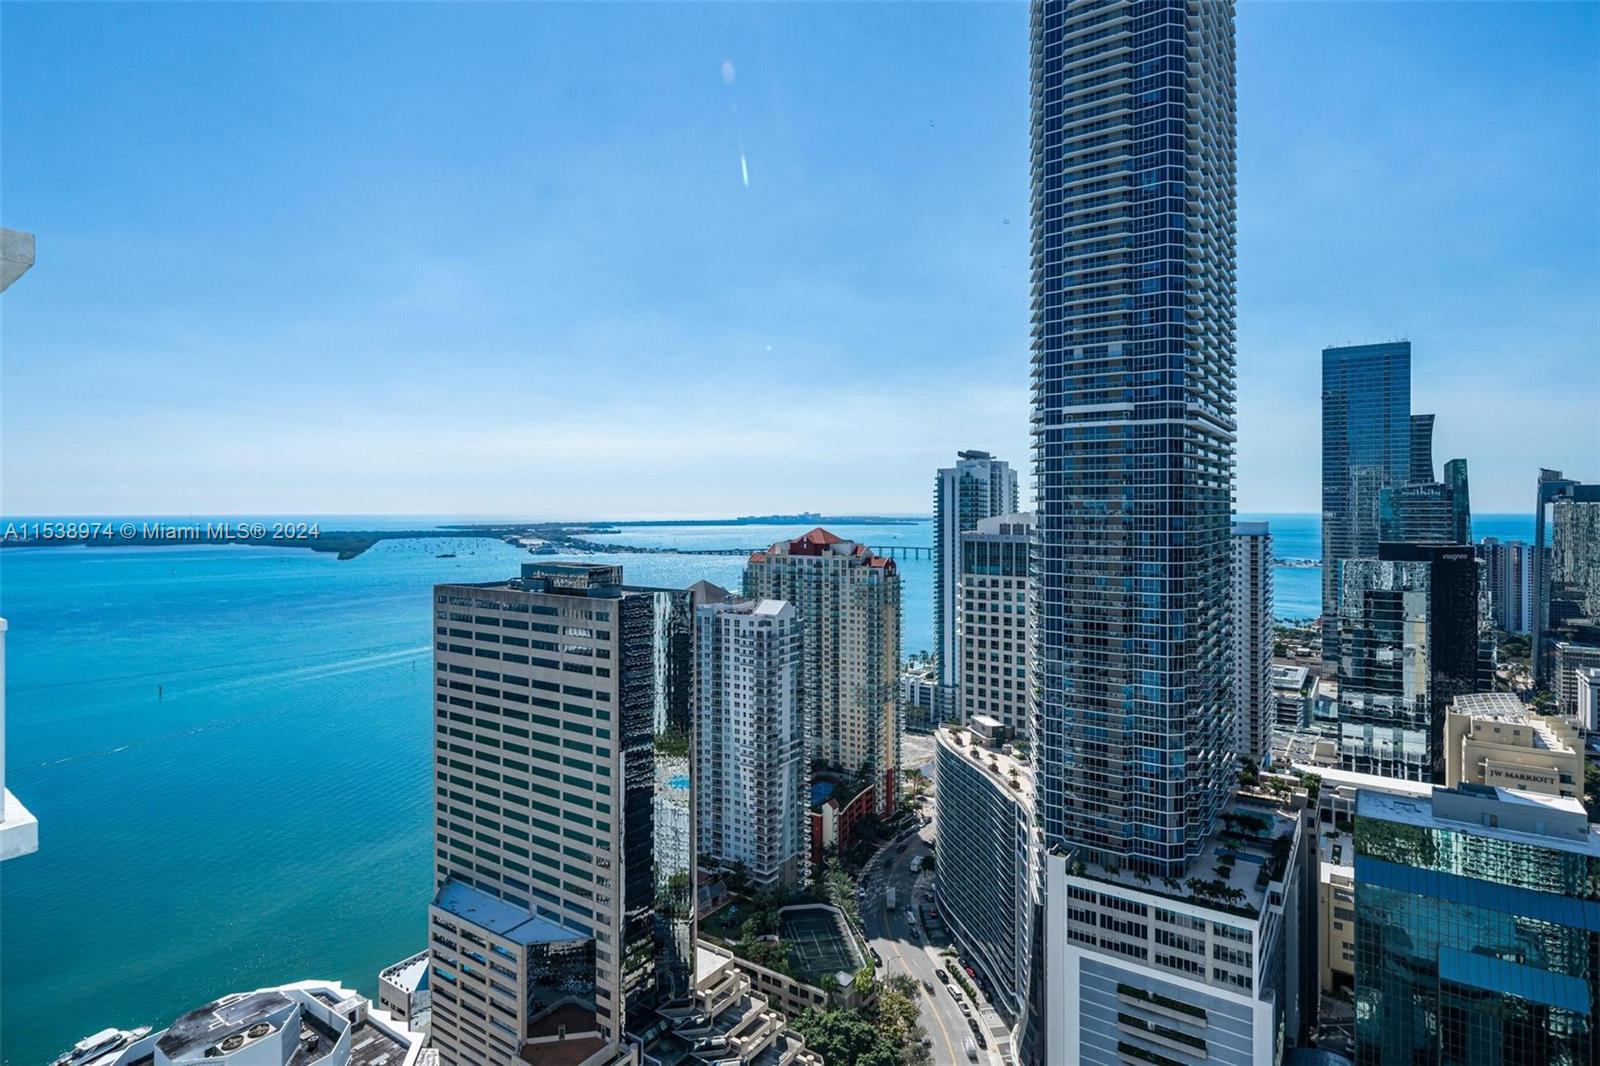 Welcome to the absolute best and upgraded 1bed/1bath with stunning water views of biscayne bay at Plaza Brickell. Features include: wood porcelain tile floors throughout, high ceilings, upgraded appliance package including GE Monogram appliances, custom backsplash in the chef kitchen, floor to ceiling windows in the living room, upgraded bathroom vanity, custom built in closet in the master bedroom, large terrace w/stunning water & skyline views & more. Located in the best part of Brickell steps to Mary Brickell Village, Brickell City Center, Metro Mover, shops & restaurants. Have access to world class amenities including: 2 infinity pools, large gym, business center, children's room, movie theatre and party room. LOW HOA & flexible renting terms of 31 days makes this a great opportunity.